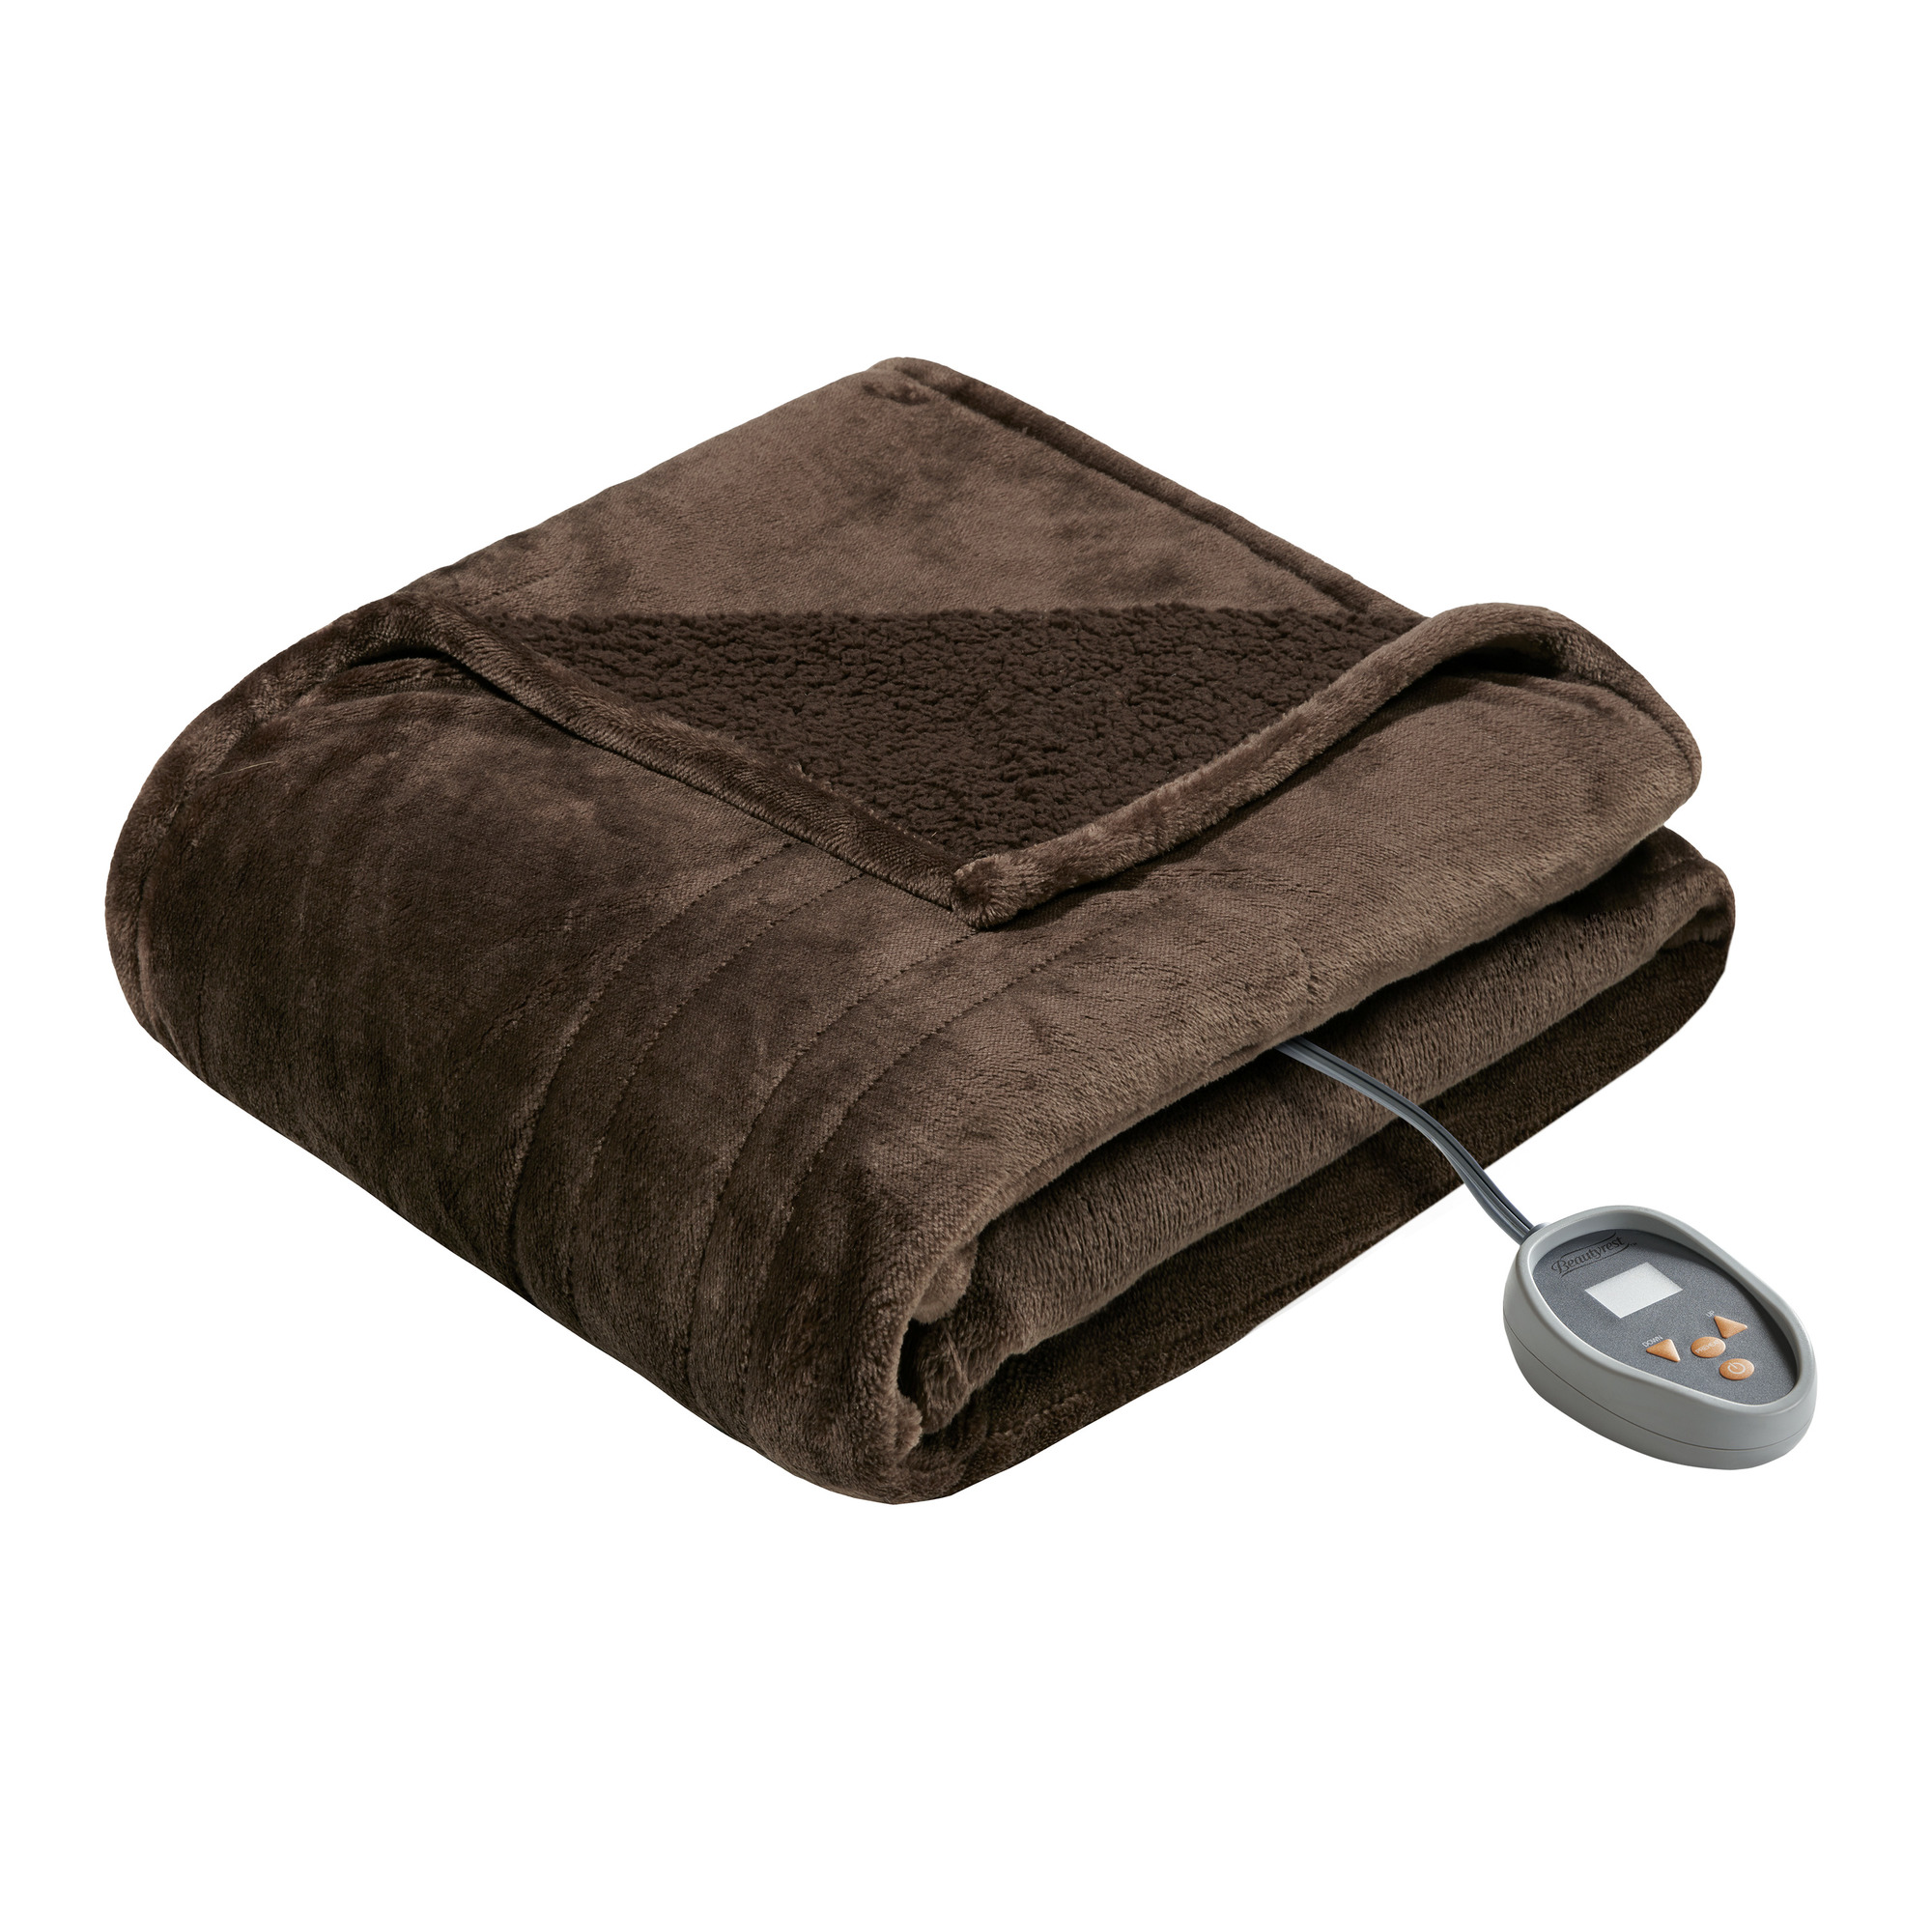 Beautyrest Heated Microlight to Berber Solid Blanket, King, Chocolate - image 5 of 10